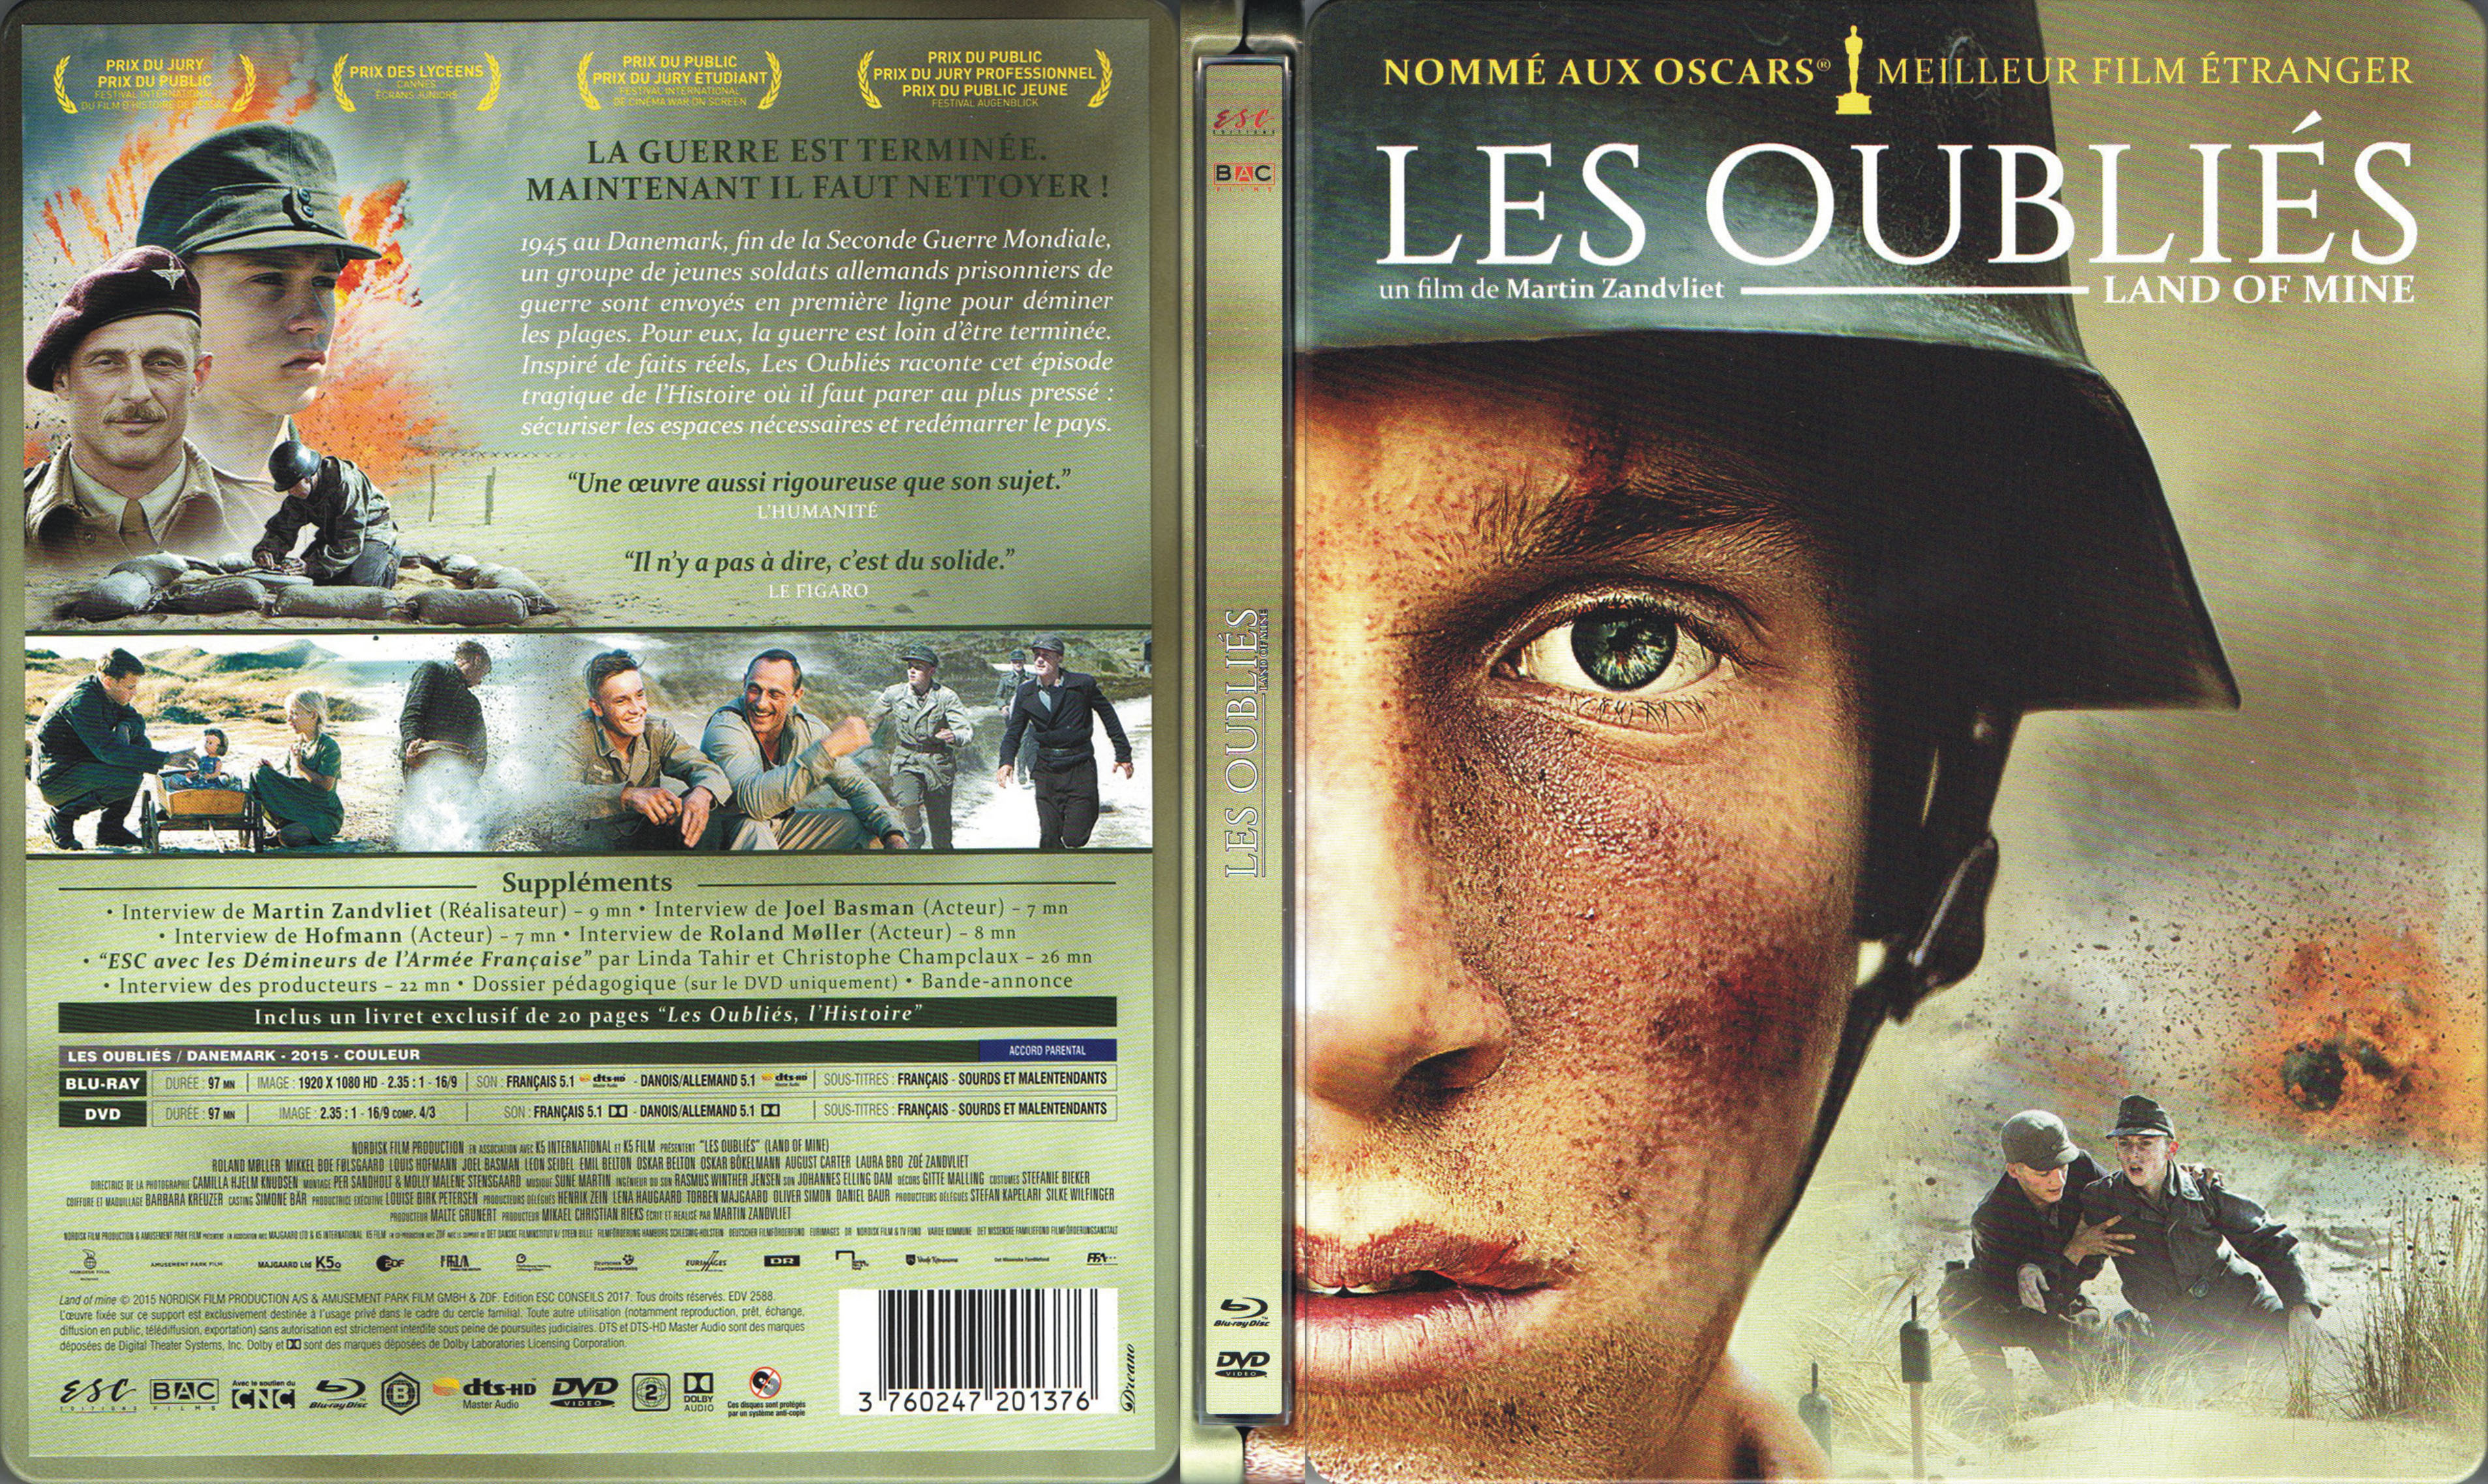 Jaquette DVD Les oublis (BLU-RAY)